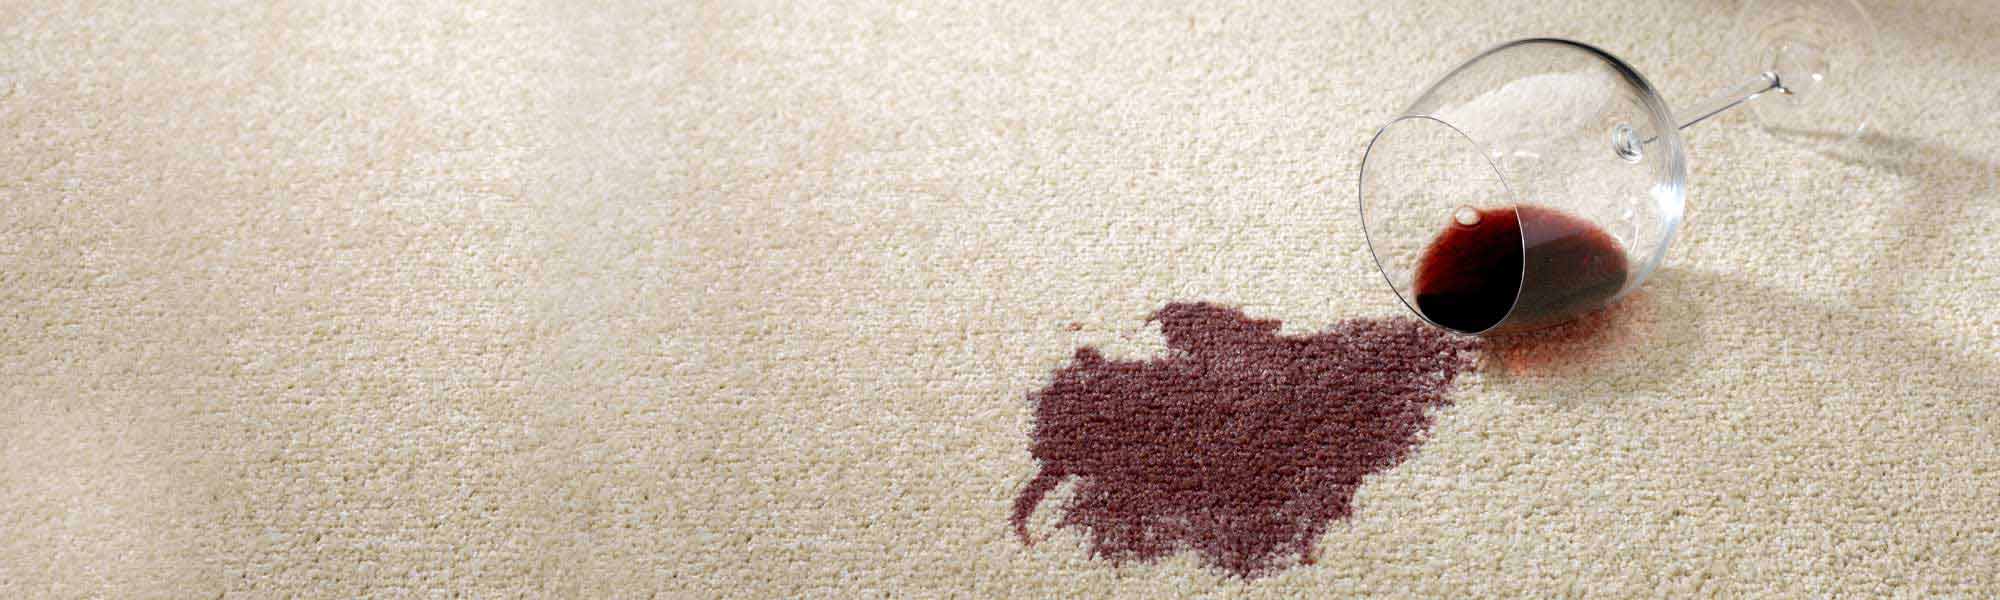 Professional Stain Removal Service by Chem-Dry of Springfield in Springfield, Illinois